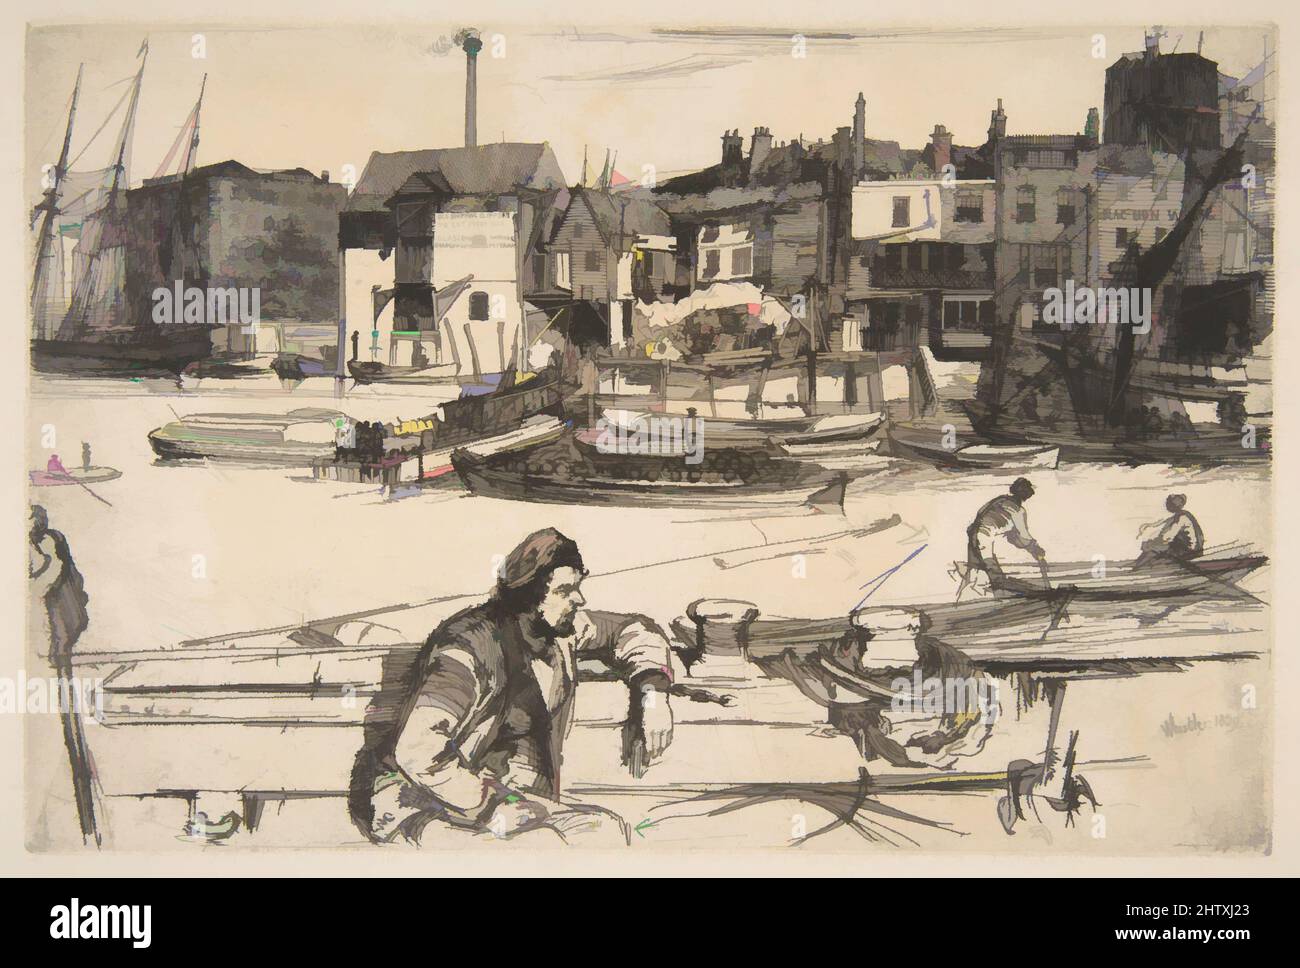 Art inspired by Black Lion Wharf, 1859, Etching; fourth state of four (Glasgow), Sheet: 11 7/16 × 16 1/8 in. (29 × 41 cm), Prints, James McNeill Whistler (American, Lowell, Massachusetts 1834–1903 London), When he moved to London in 1859, Whistler lodged near the Thames in the, Classic works modernized by Artotop with a splash of modernity. Shapes, color and value, eye-catching visual impact on art. Emotions through freedom of artworks in a contemporary way. A timeless message pursuing a wildly creative new direction. Artists turning to the digital medium and creating the Artotop NFT Stock Photo